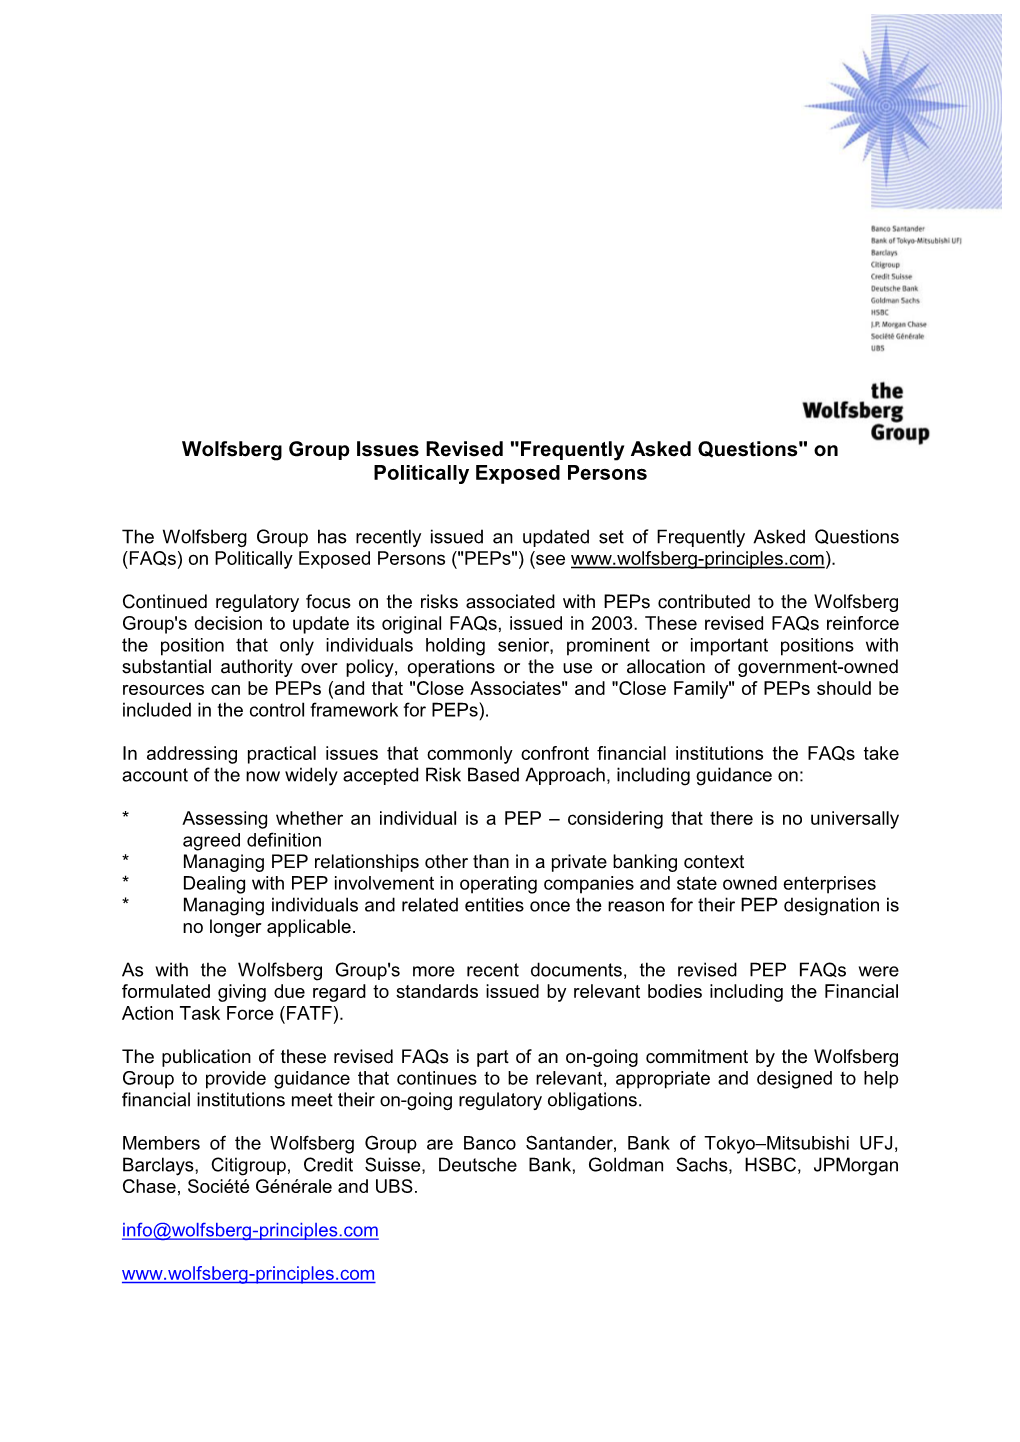 Wolfsberg Group Issues Revised "Frequently Asked Questions" on Politically Exposed Persons